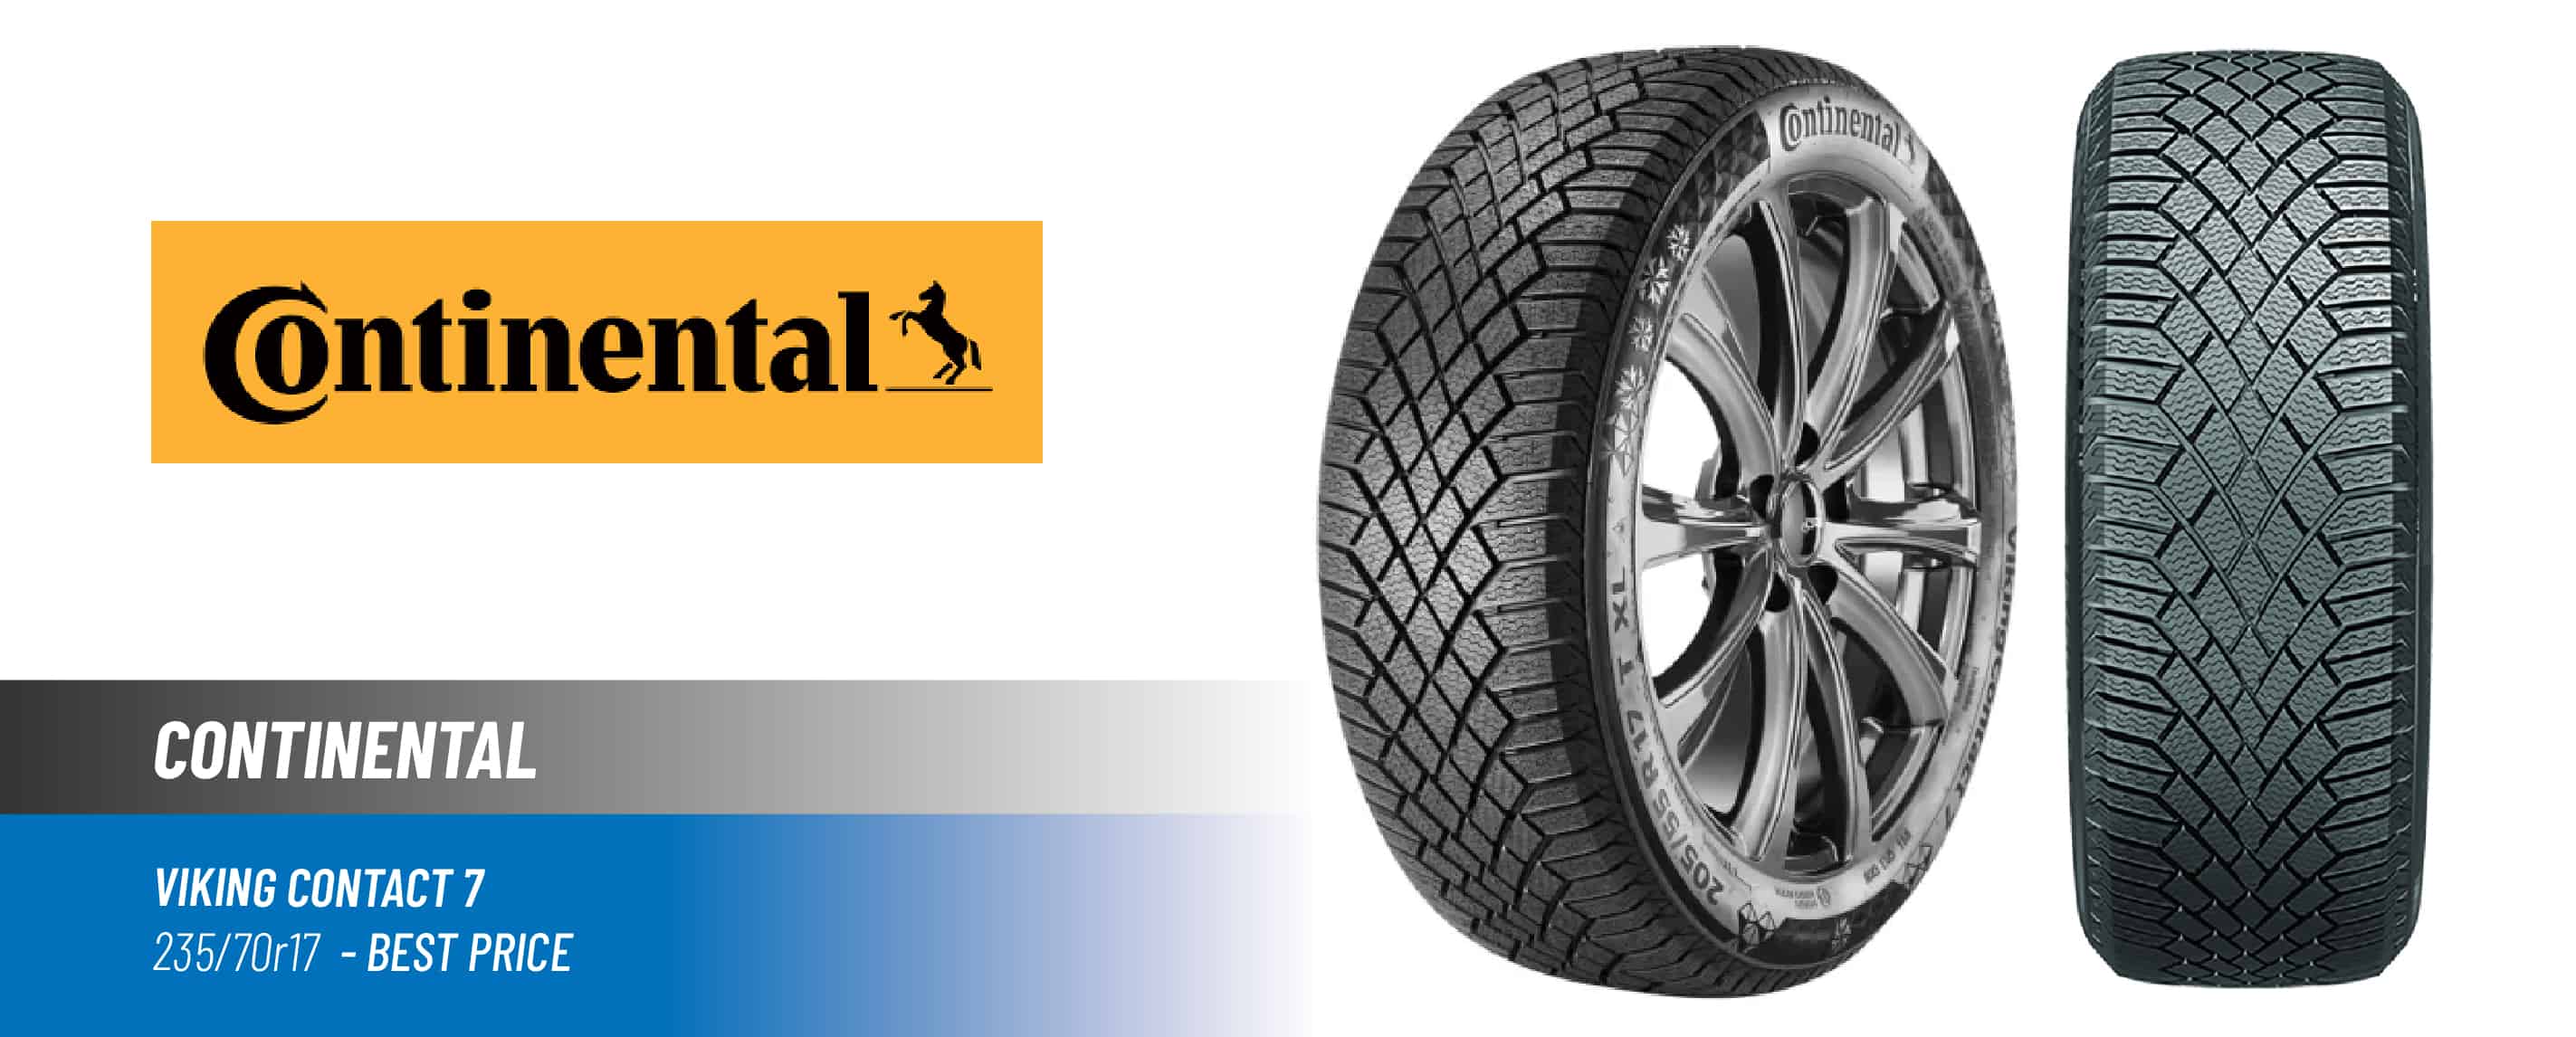 Top#1 Best Price: Continental Viking Contact 7 –best 235/70 R17